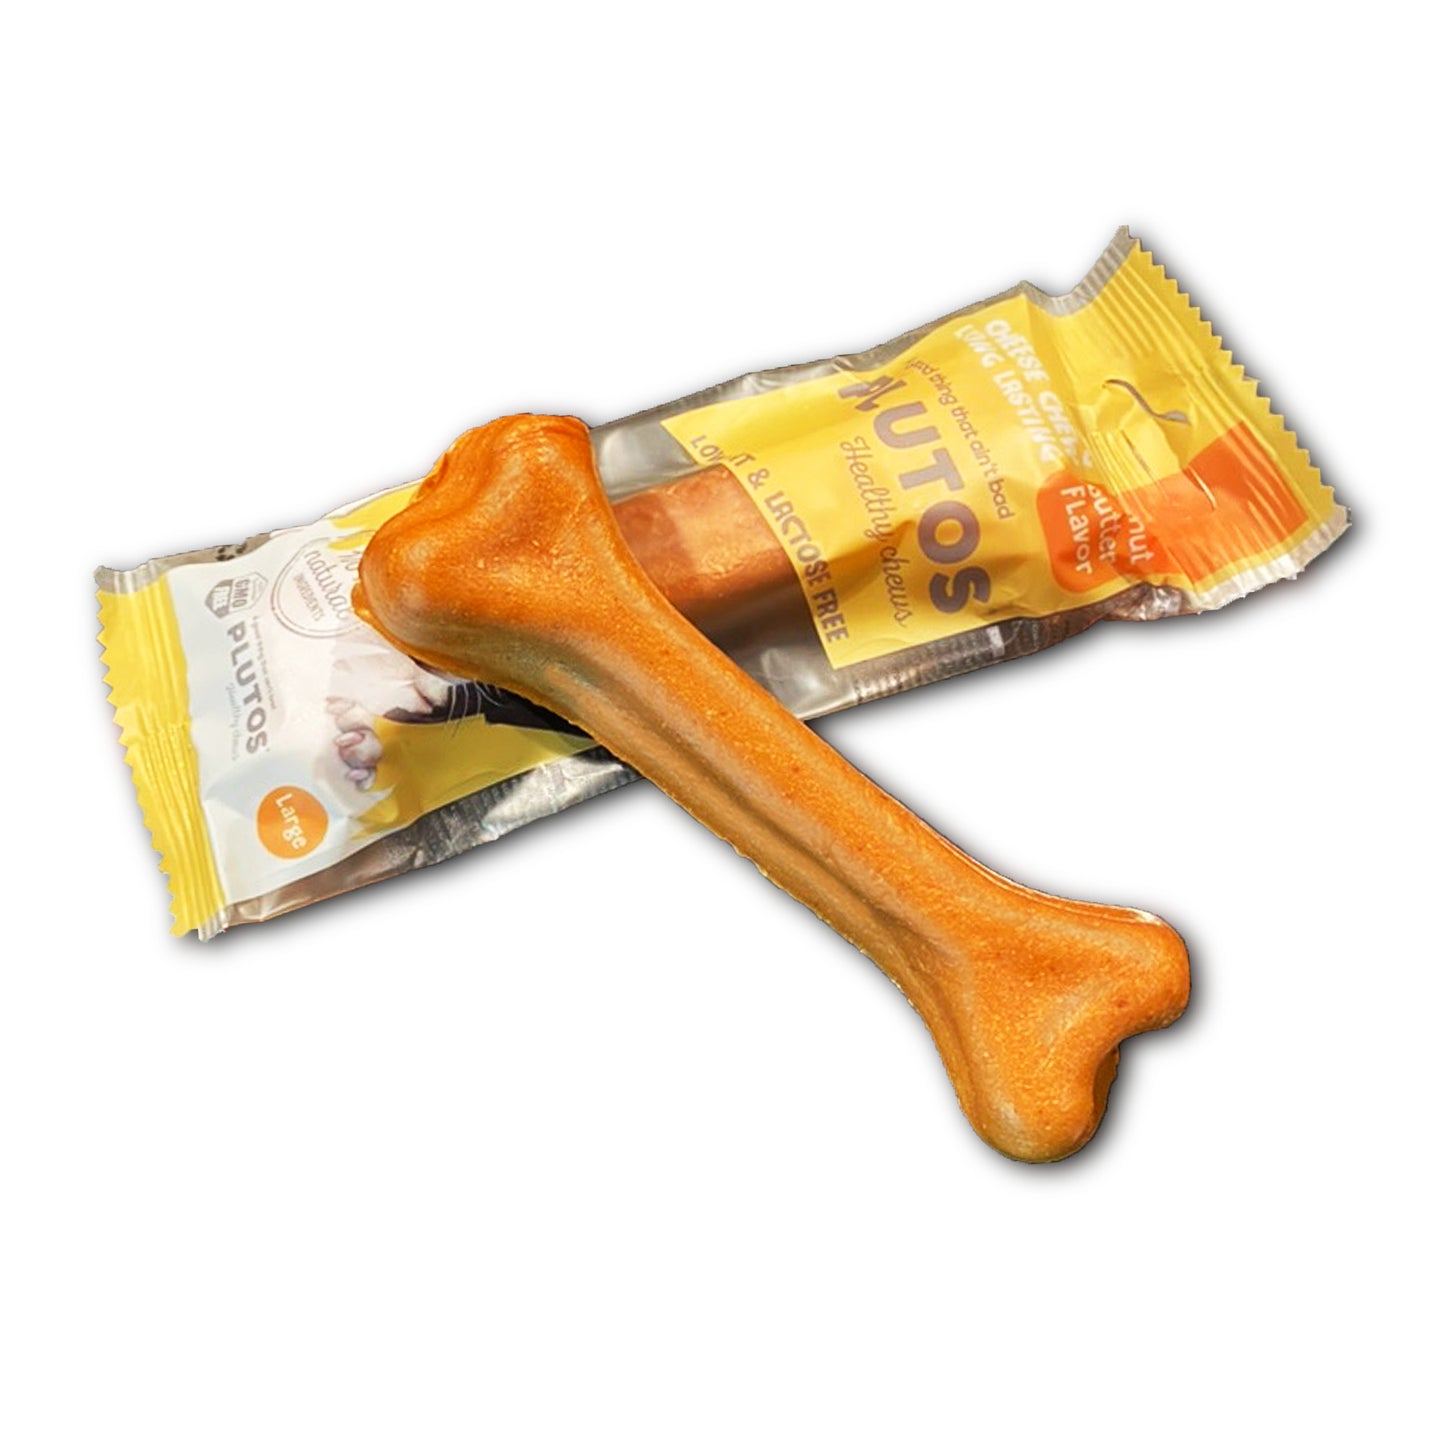 Plutos Cheese Chew with Peanut Butter